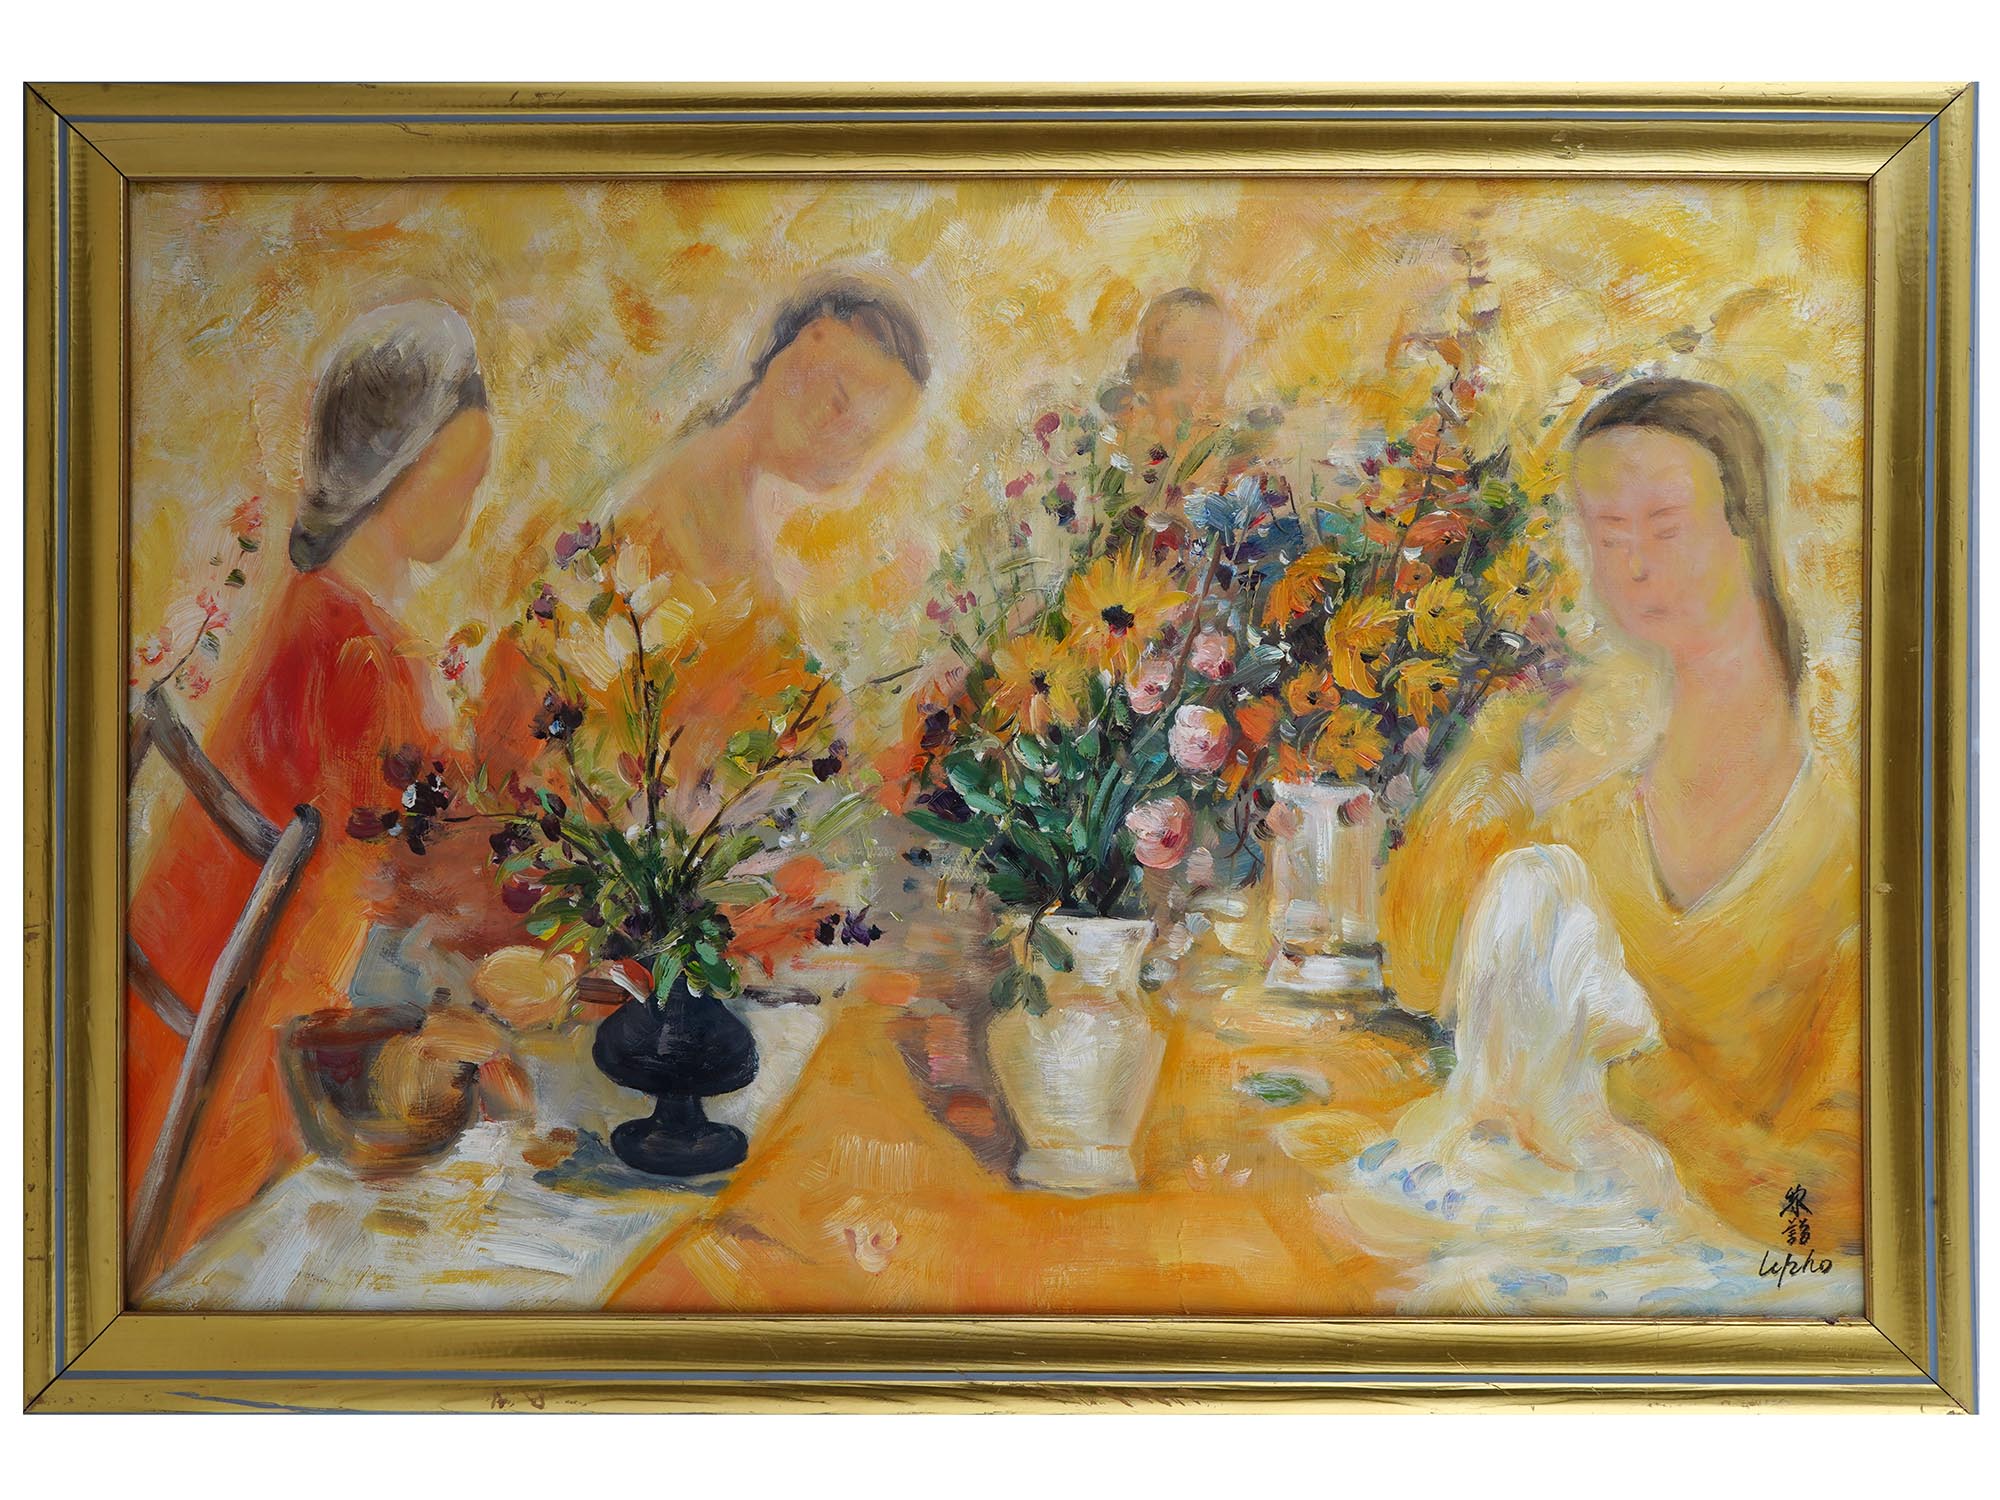 ATTRIBUTED TO LE PHO VIETNAMESE SCENE OIL PAINTING PIC-0